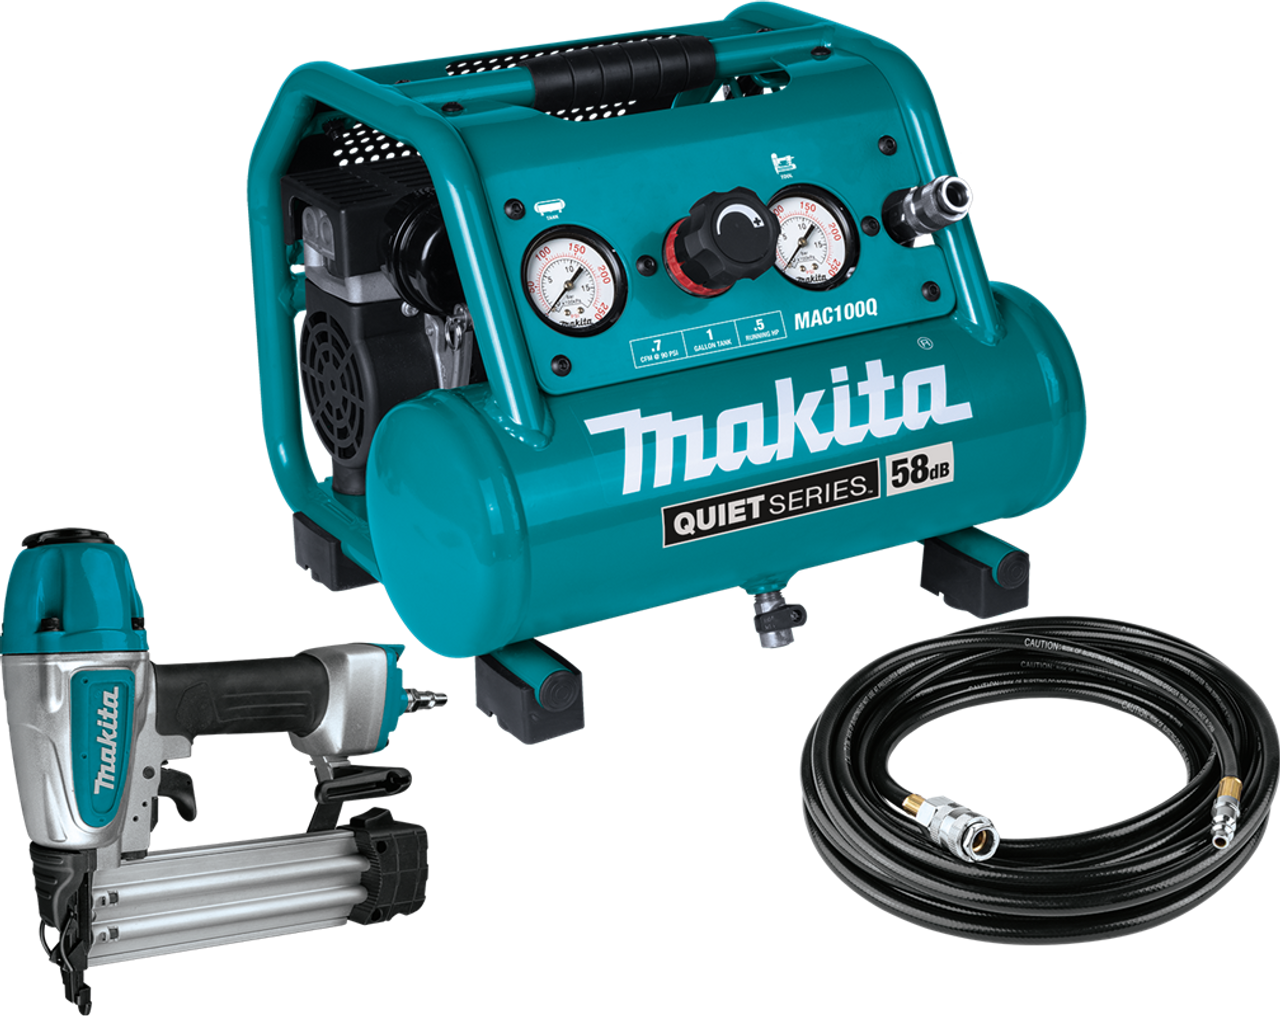 Quiet Series 1/2 HP, 1 Gallon Compact, Oil-Free, Electric Air Compressor, and 18 Gauge Brad Nailer Combo Kit, MAC100QK1